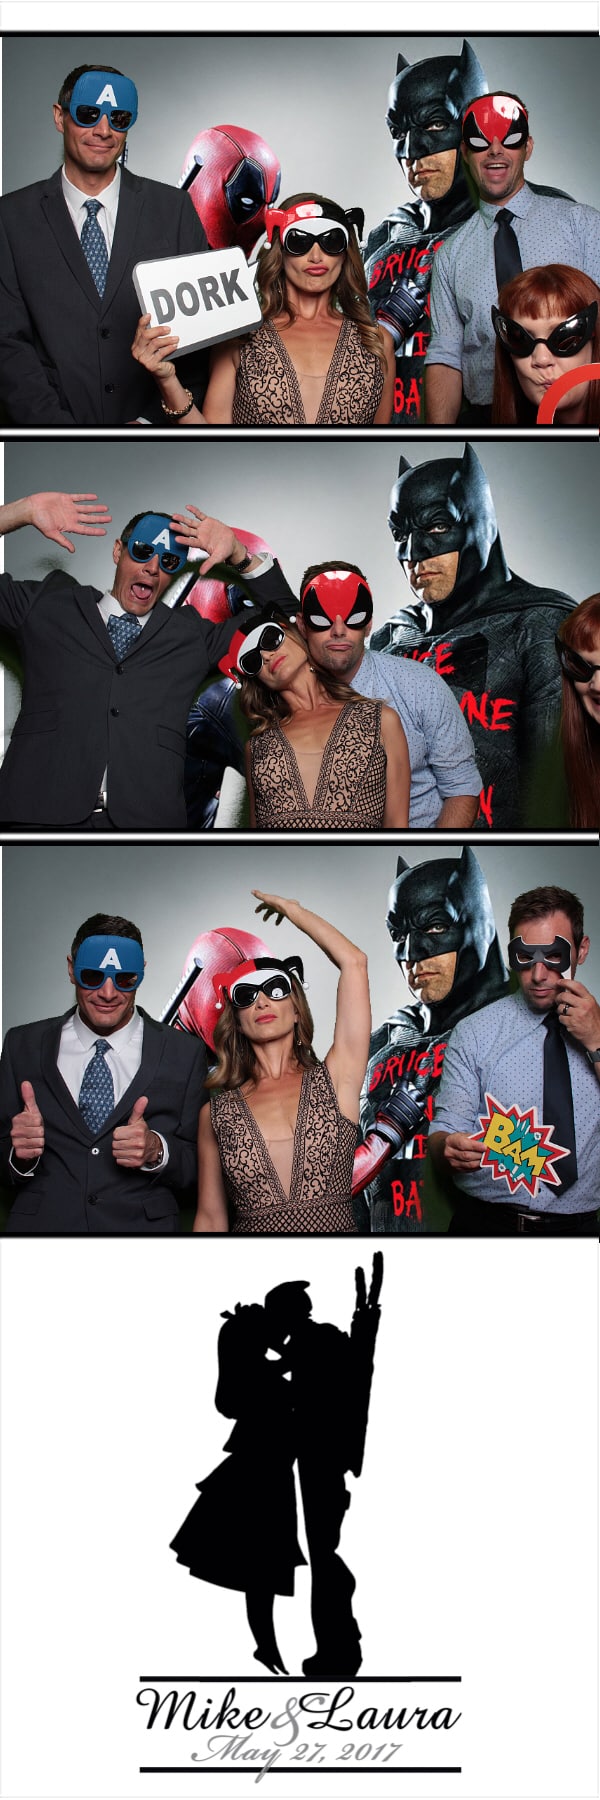 2x6 photo strip of group posing in front of superhero backdrop